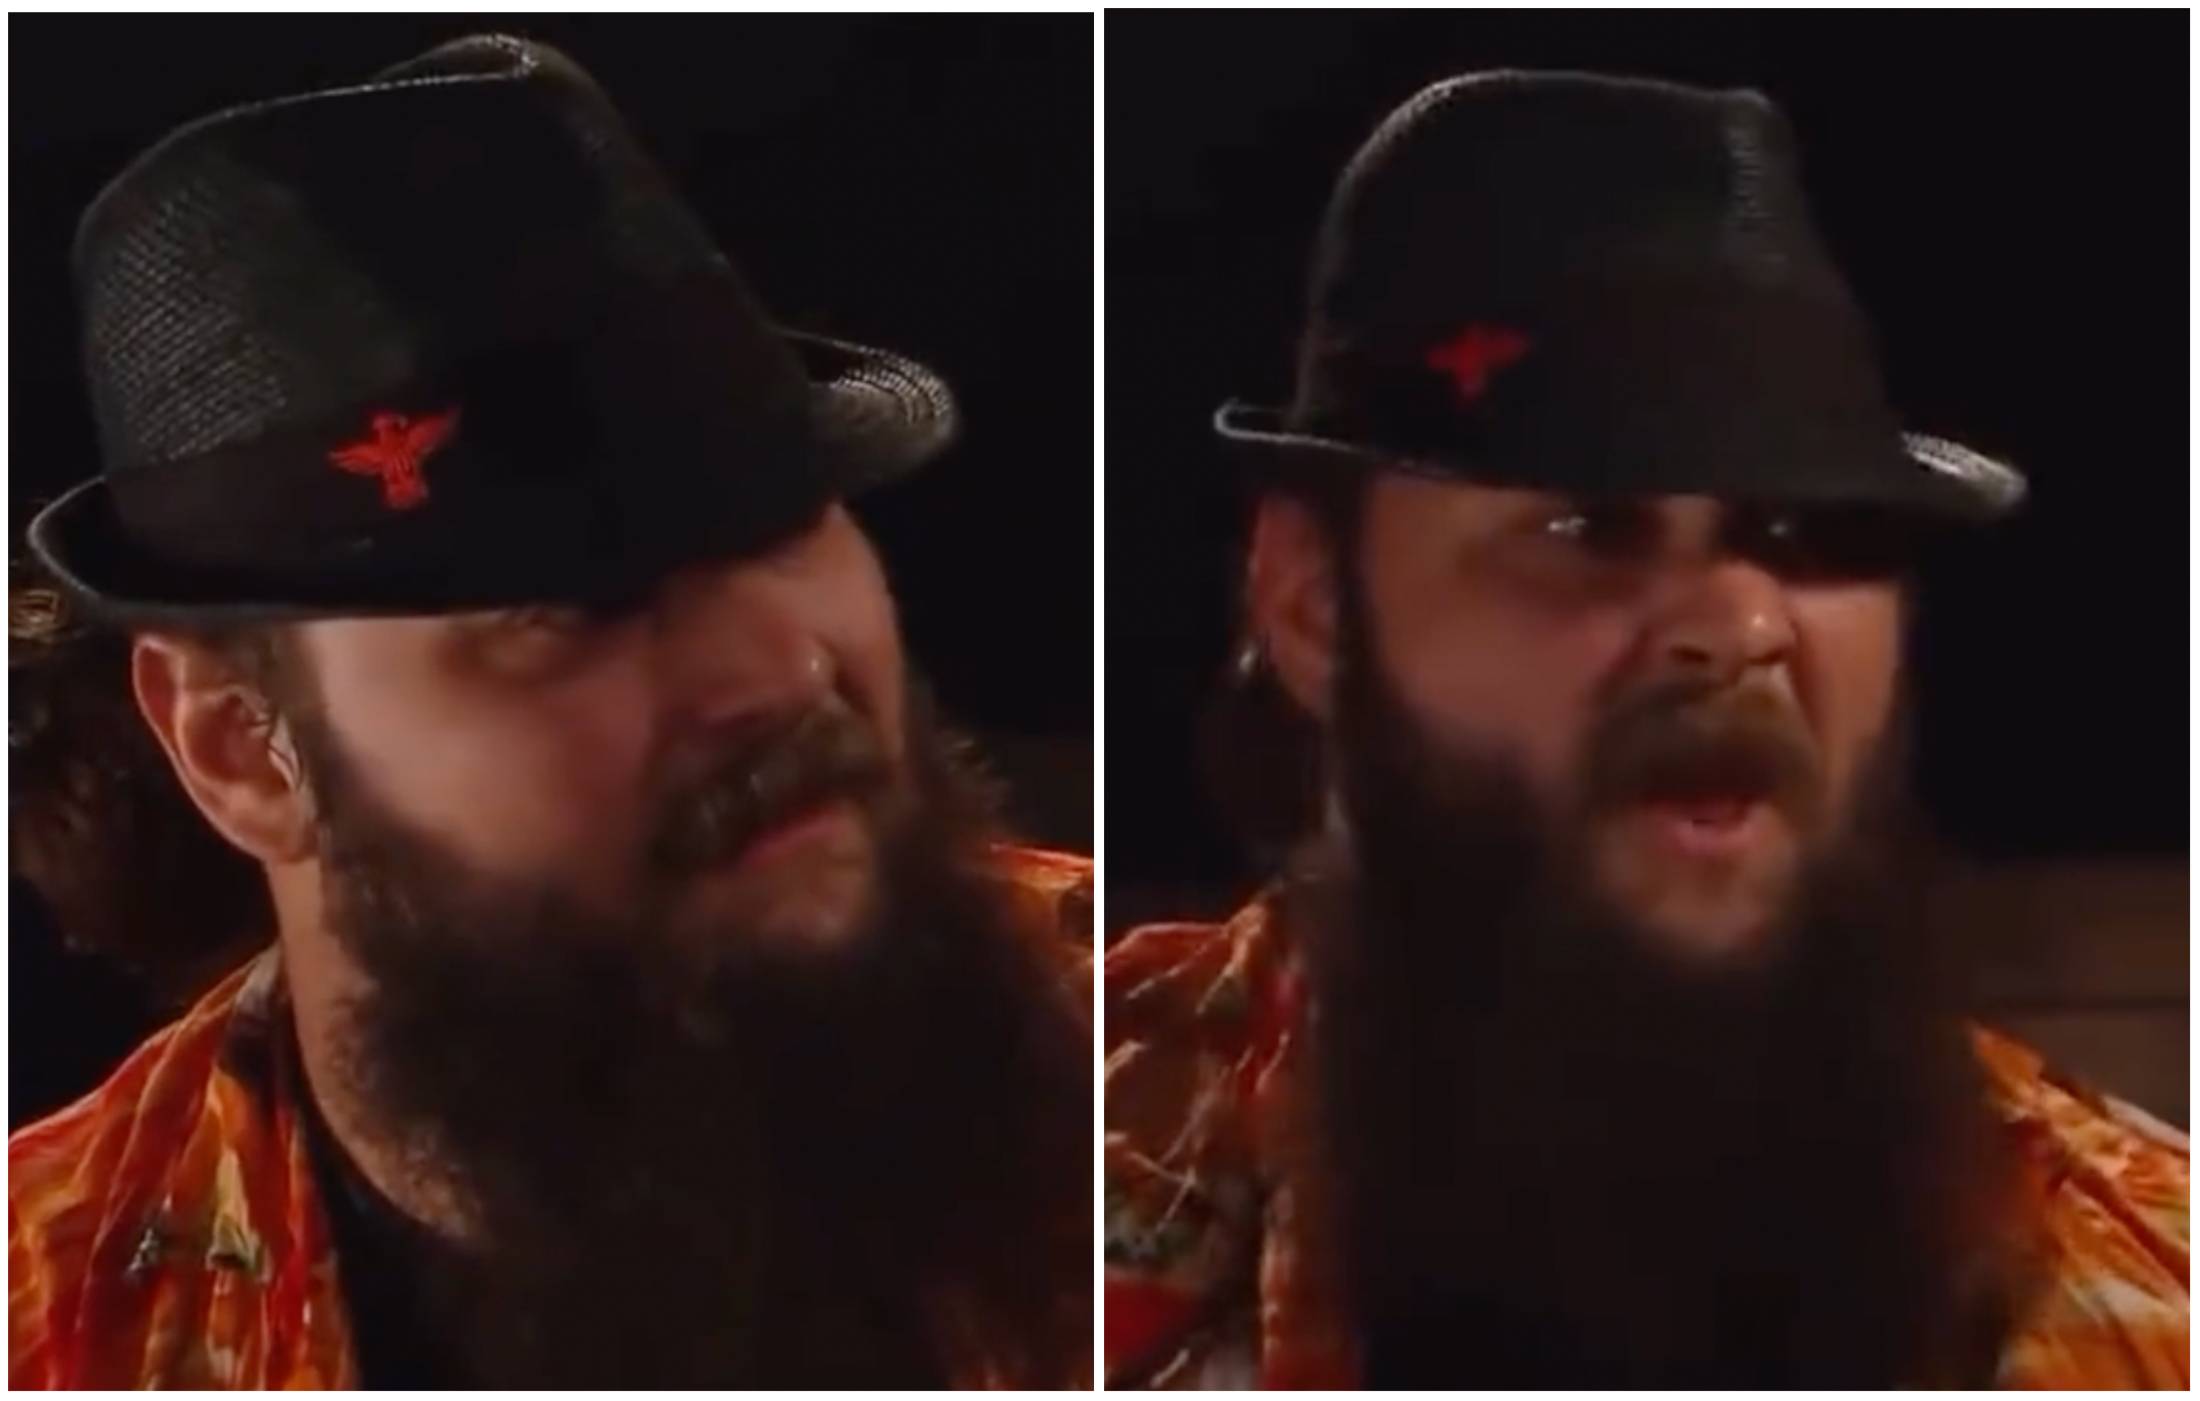 Bray Wyatt's 2015 interview with Michael Cole